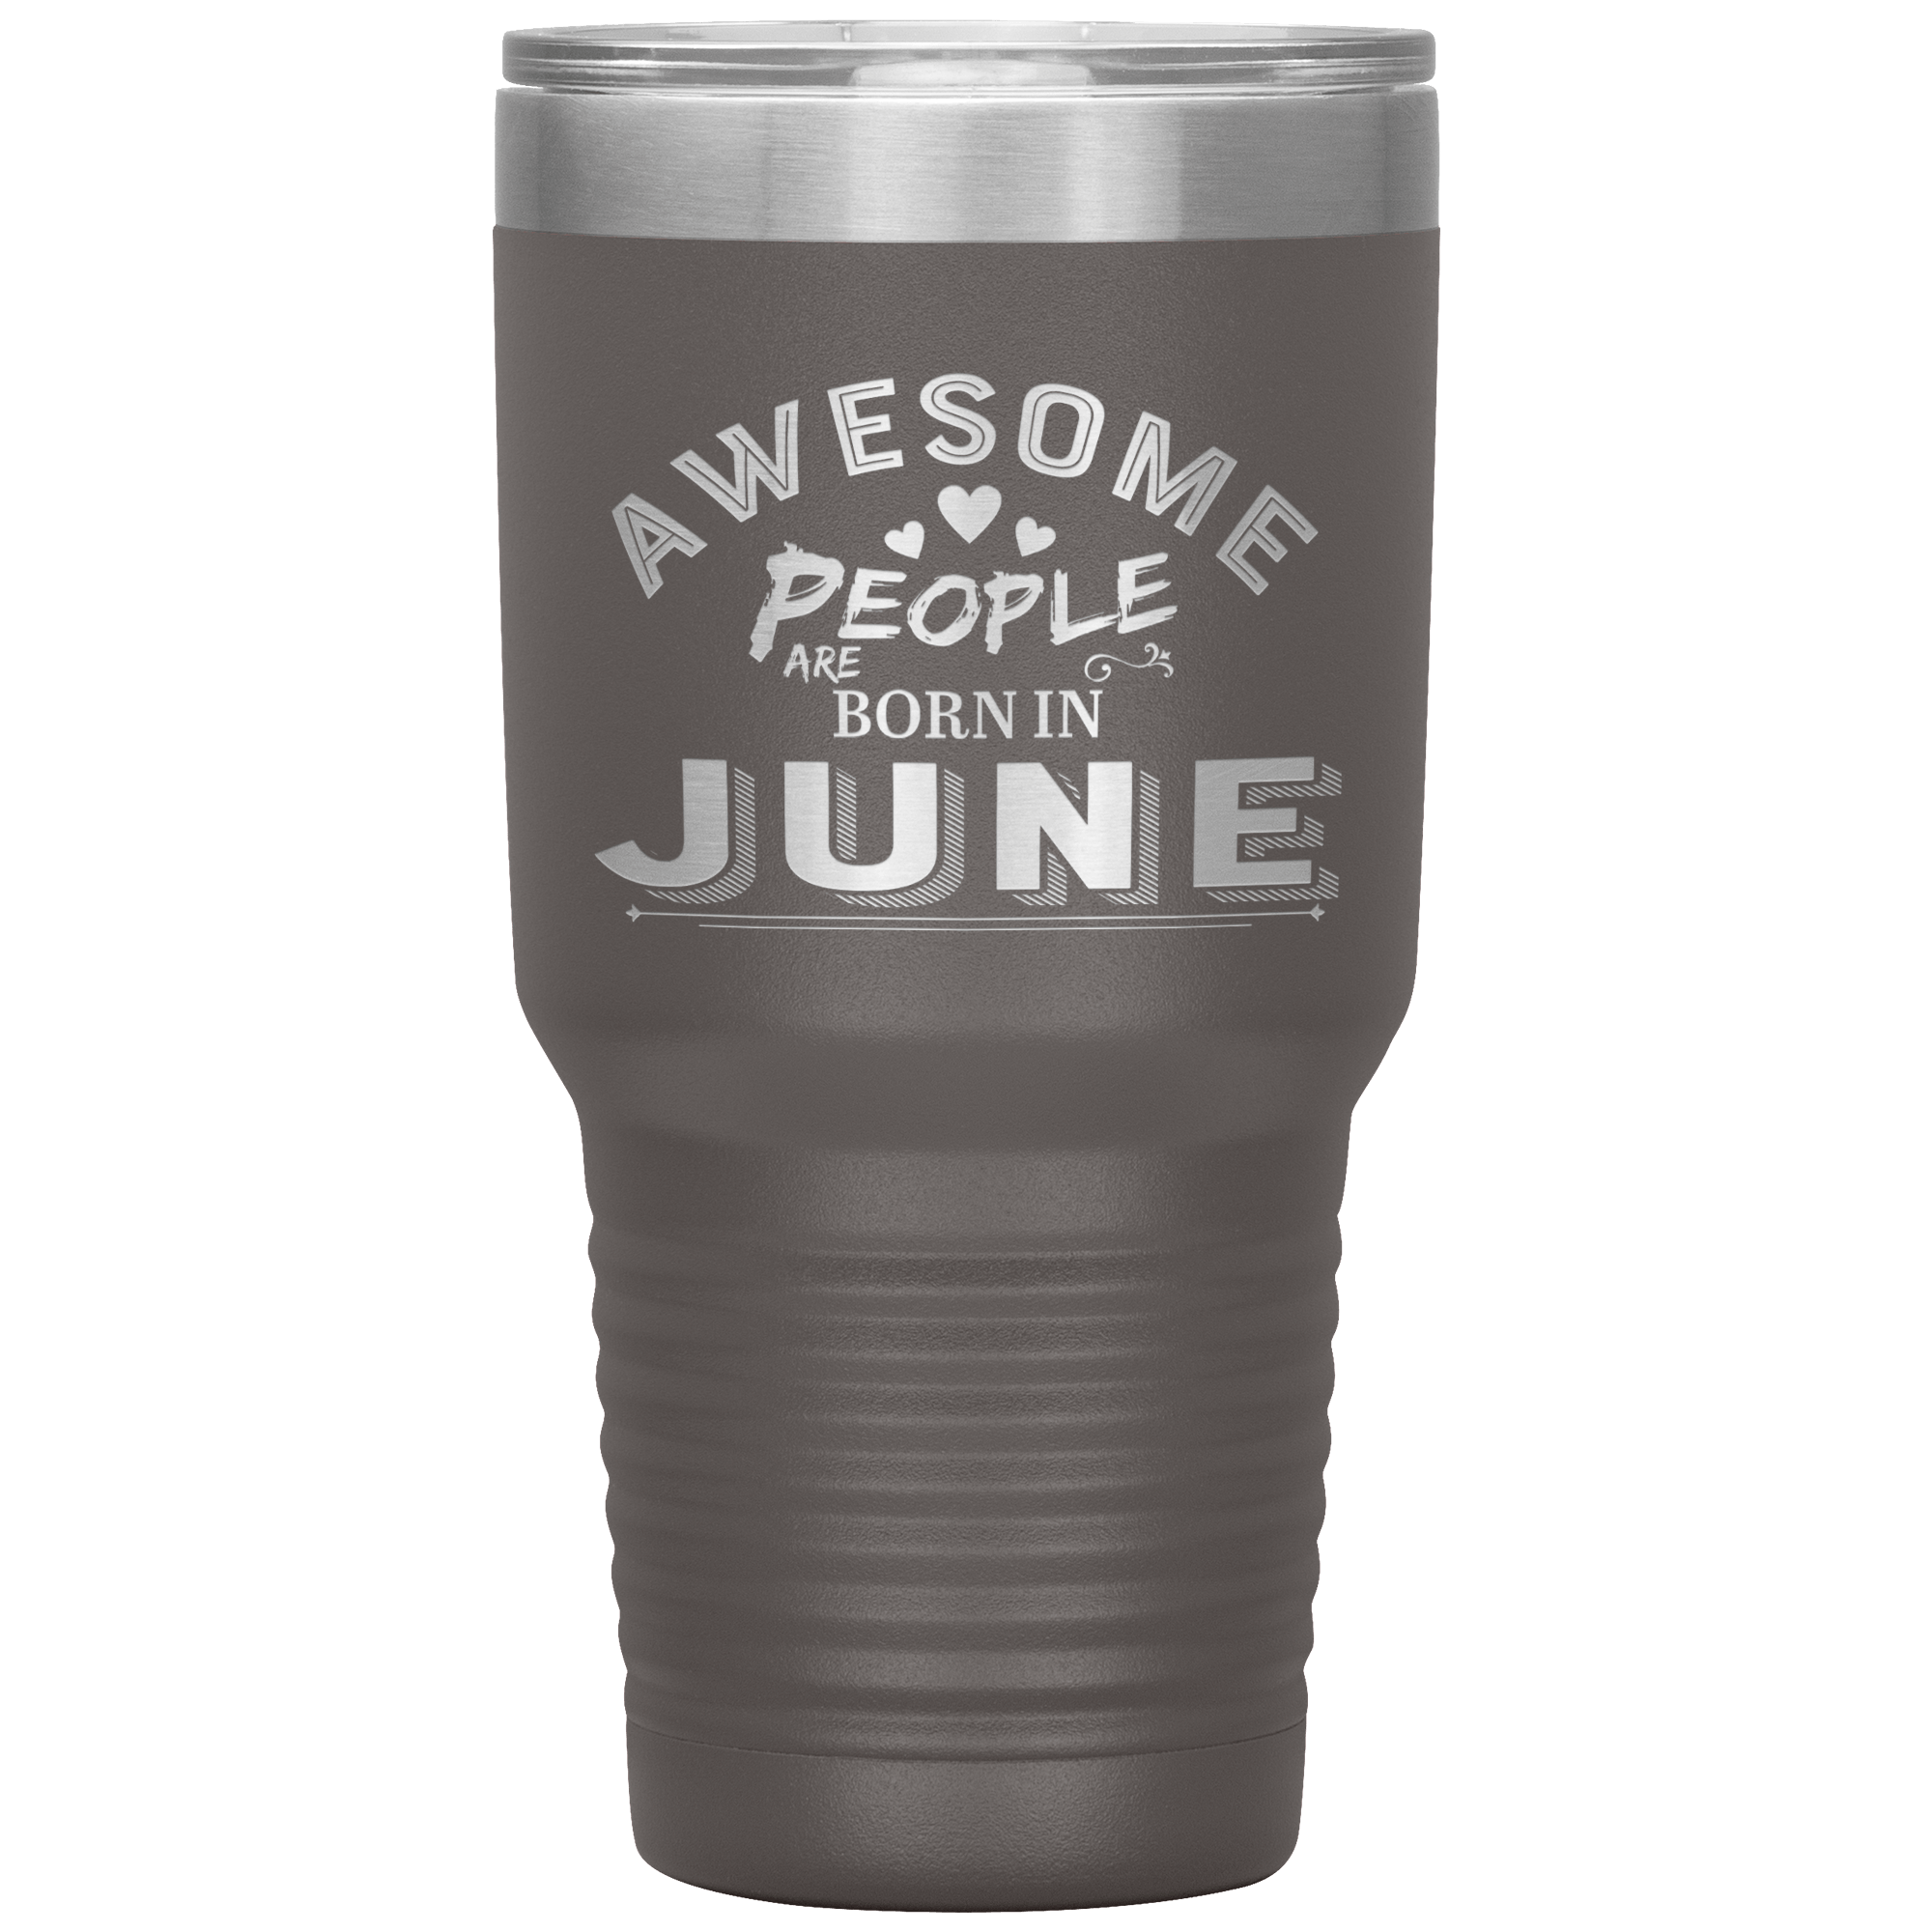 "AWESOME PEOPLE ARE BORN IN JUNE" Tumbler